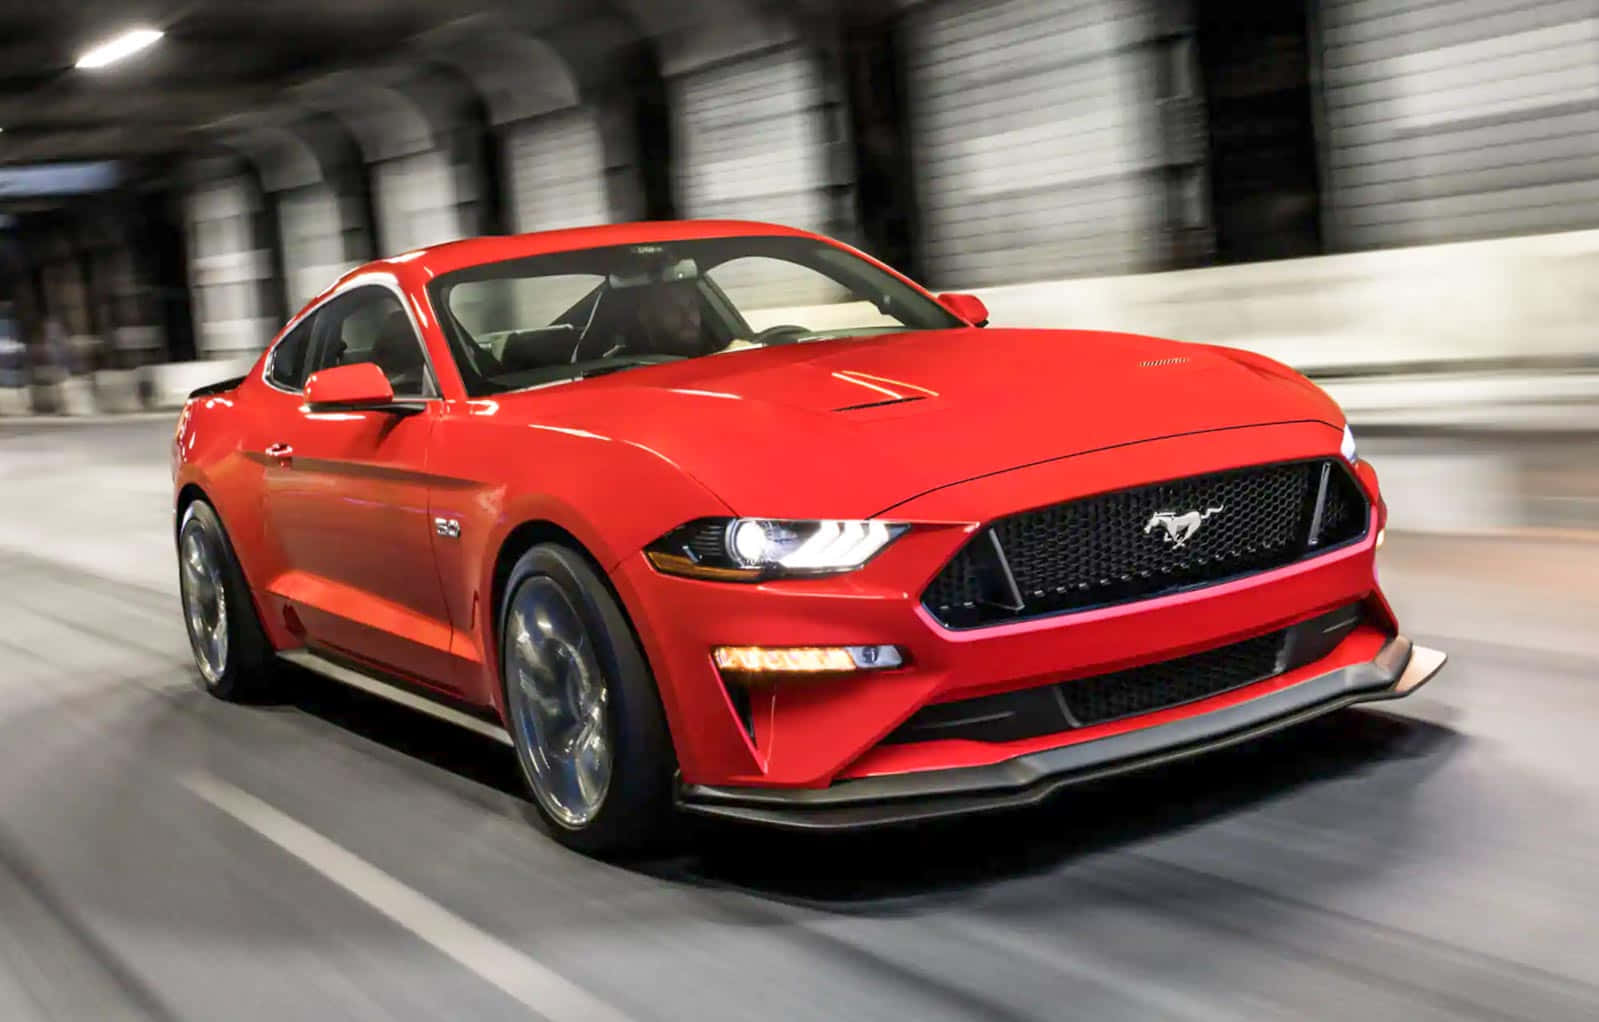 Speed Thrills - Take a Ride on the Mustang